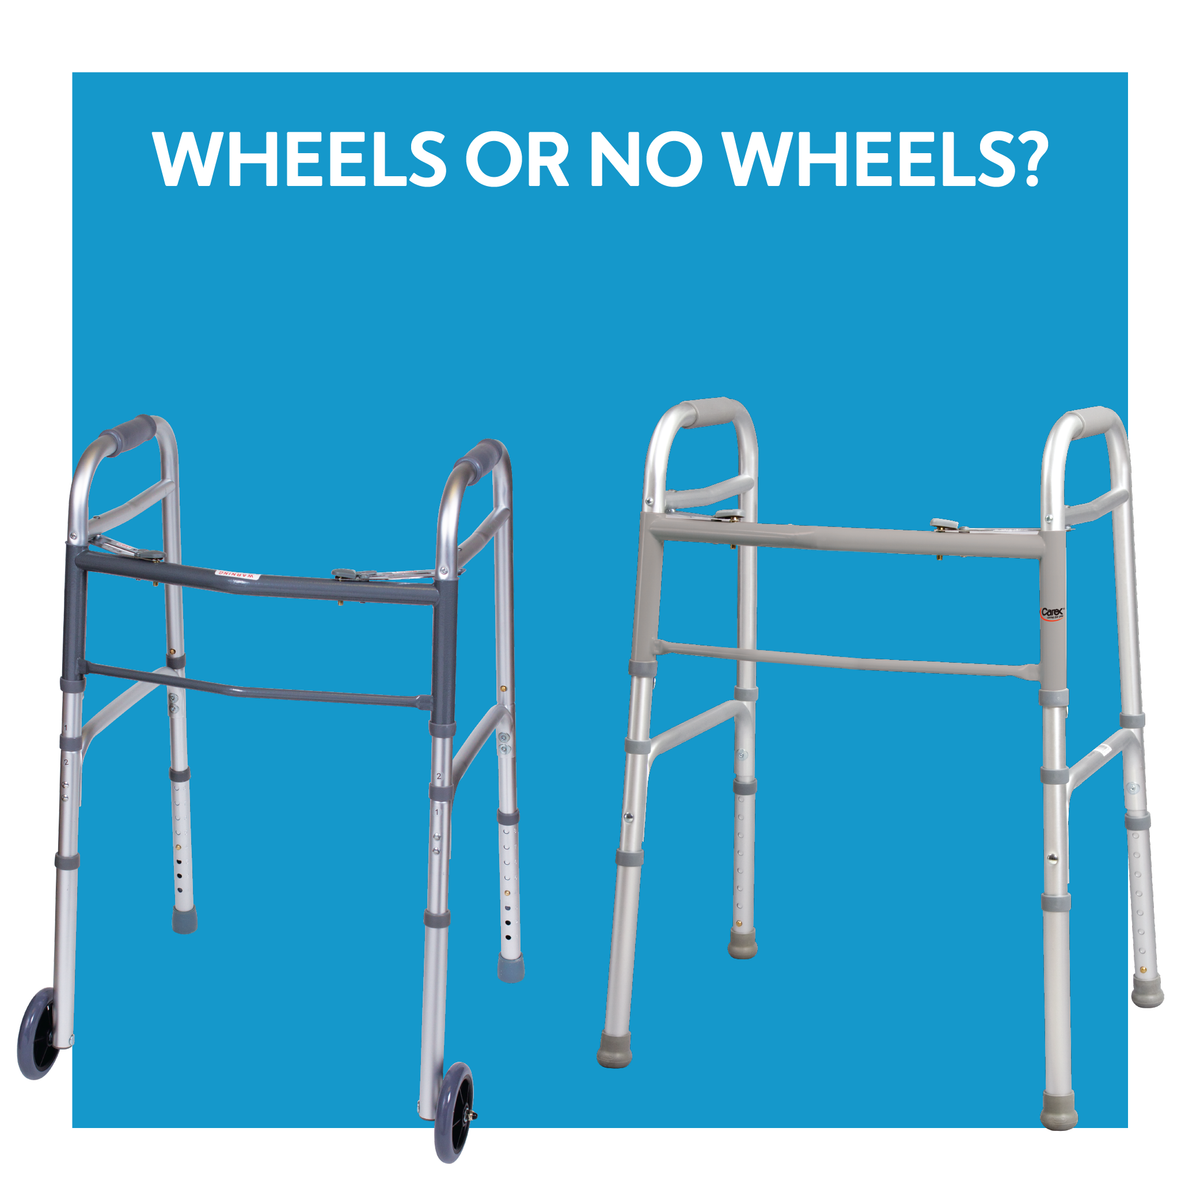 A walker with wheels next to one without. Text, “wheels or no wheels?